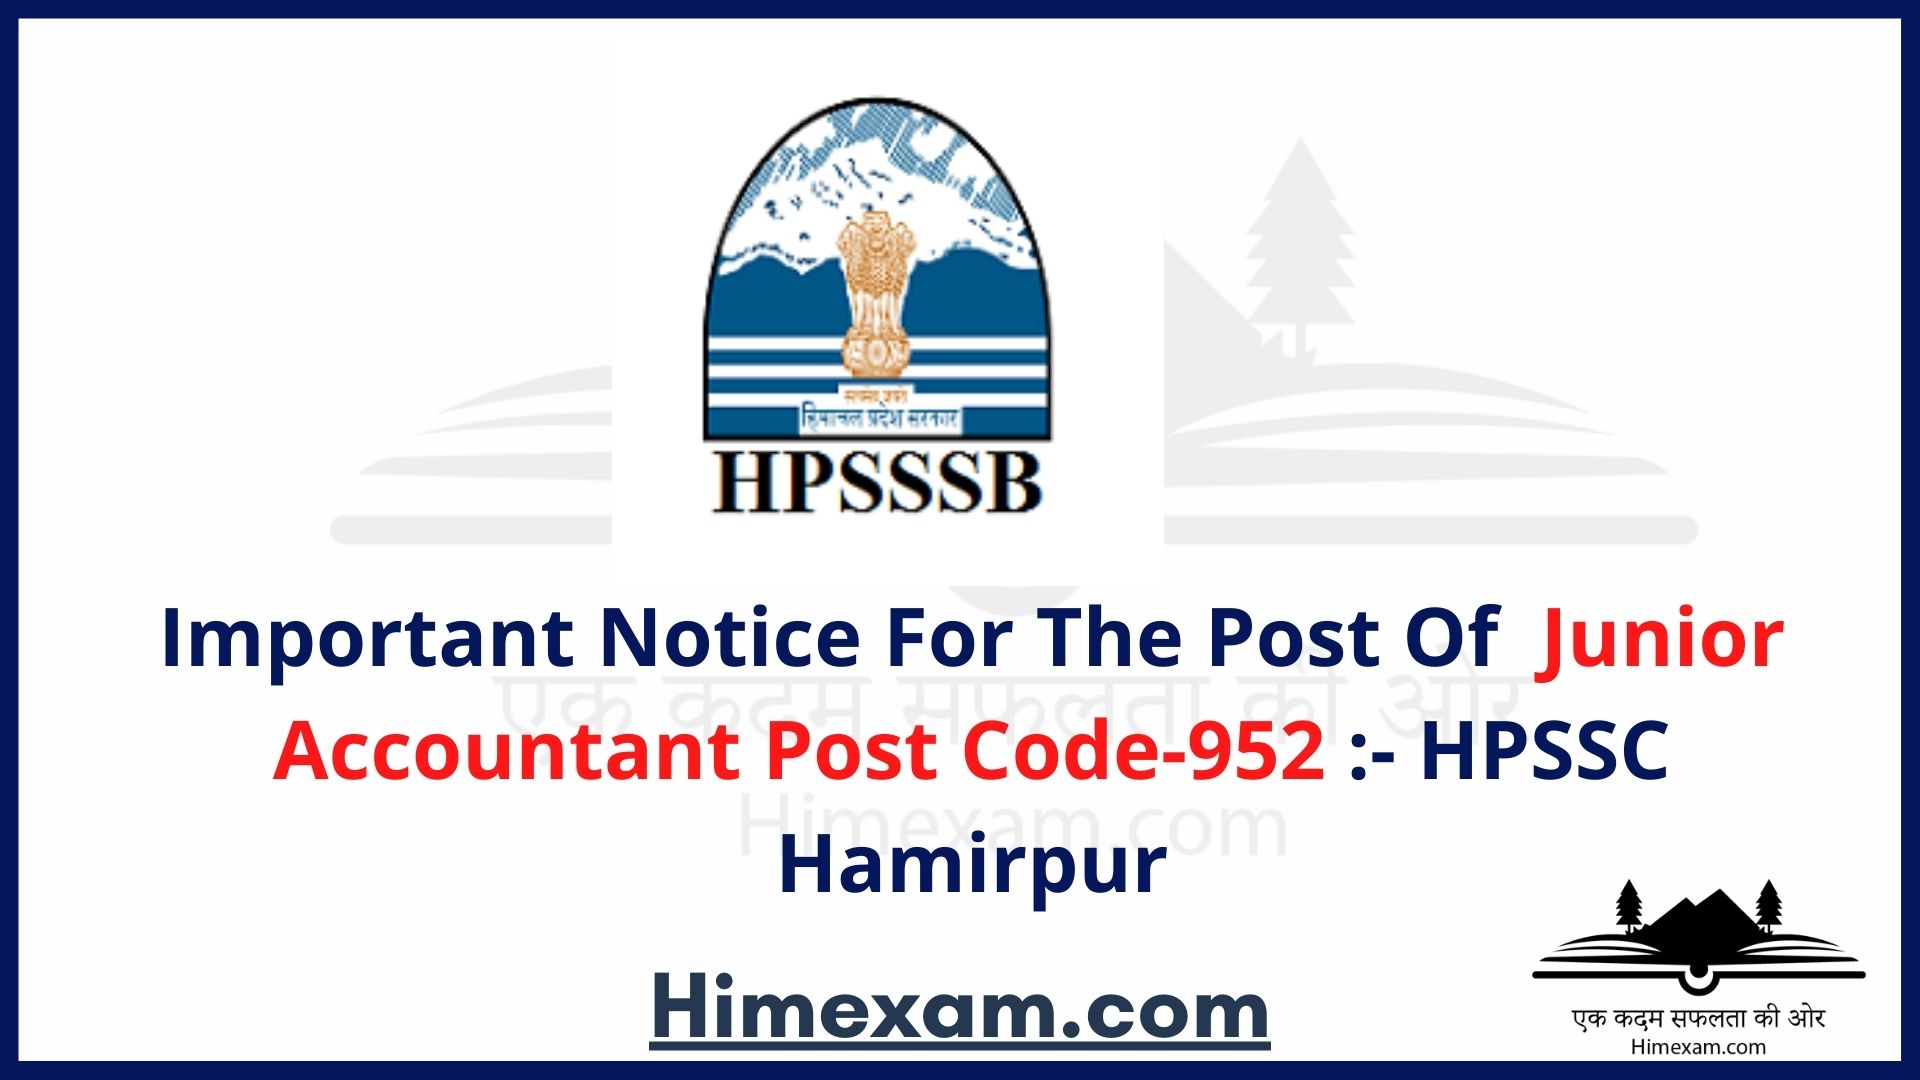 Important Notice For The Post Of  Junior Accountant Post Code-952 :- HPSSC Hamirpur